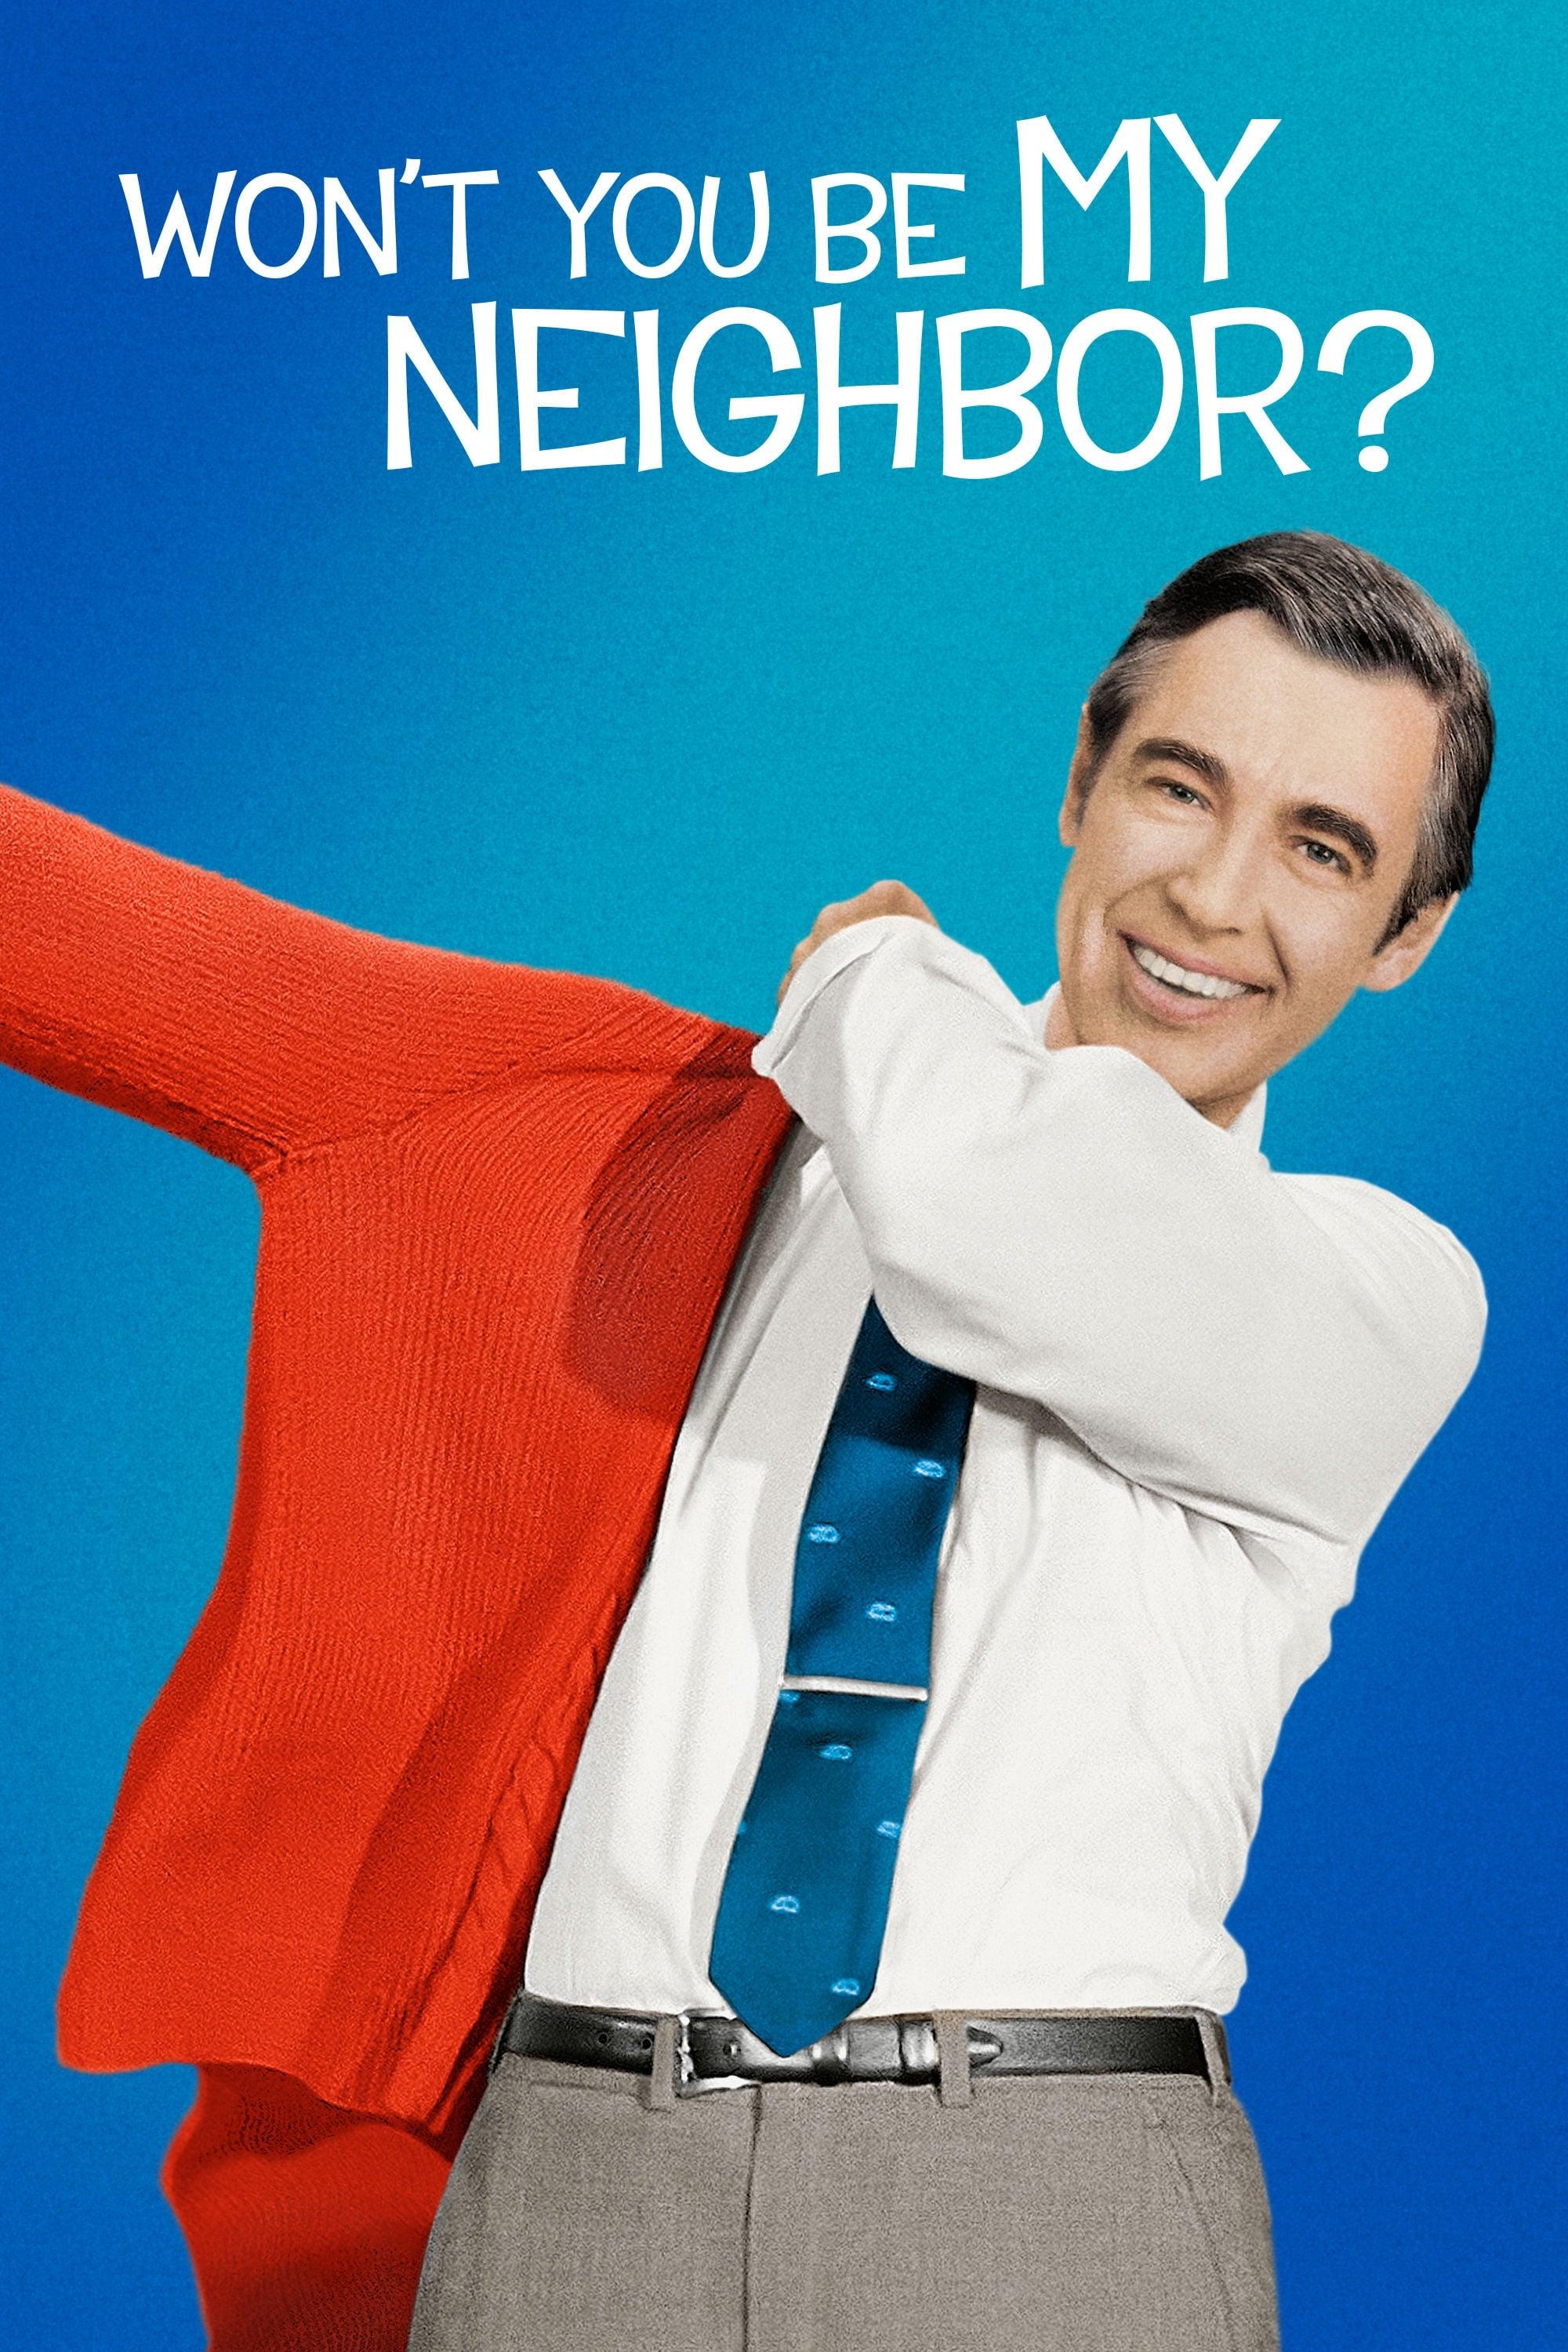 Won't You Be My Neighbor? poster